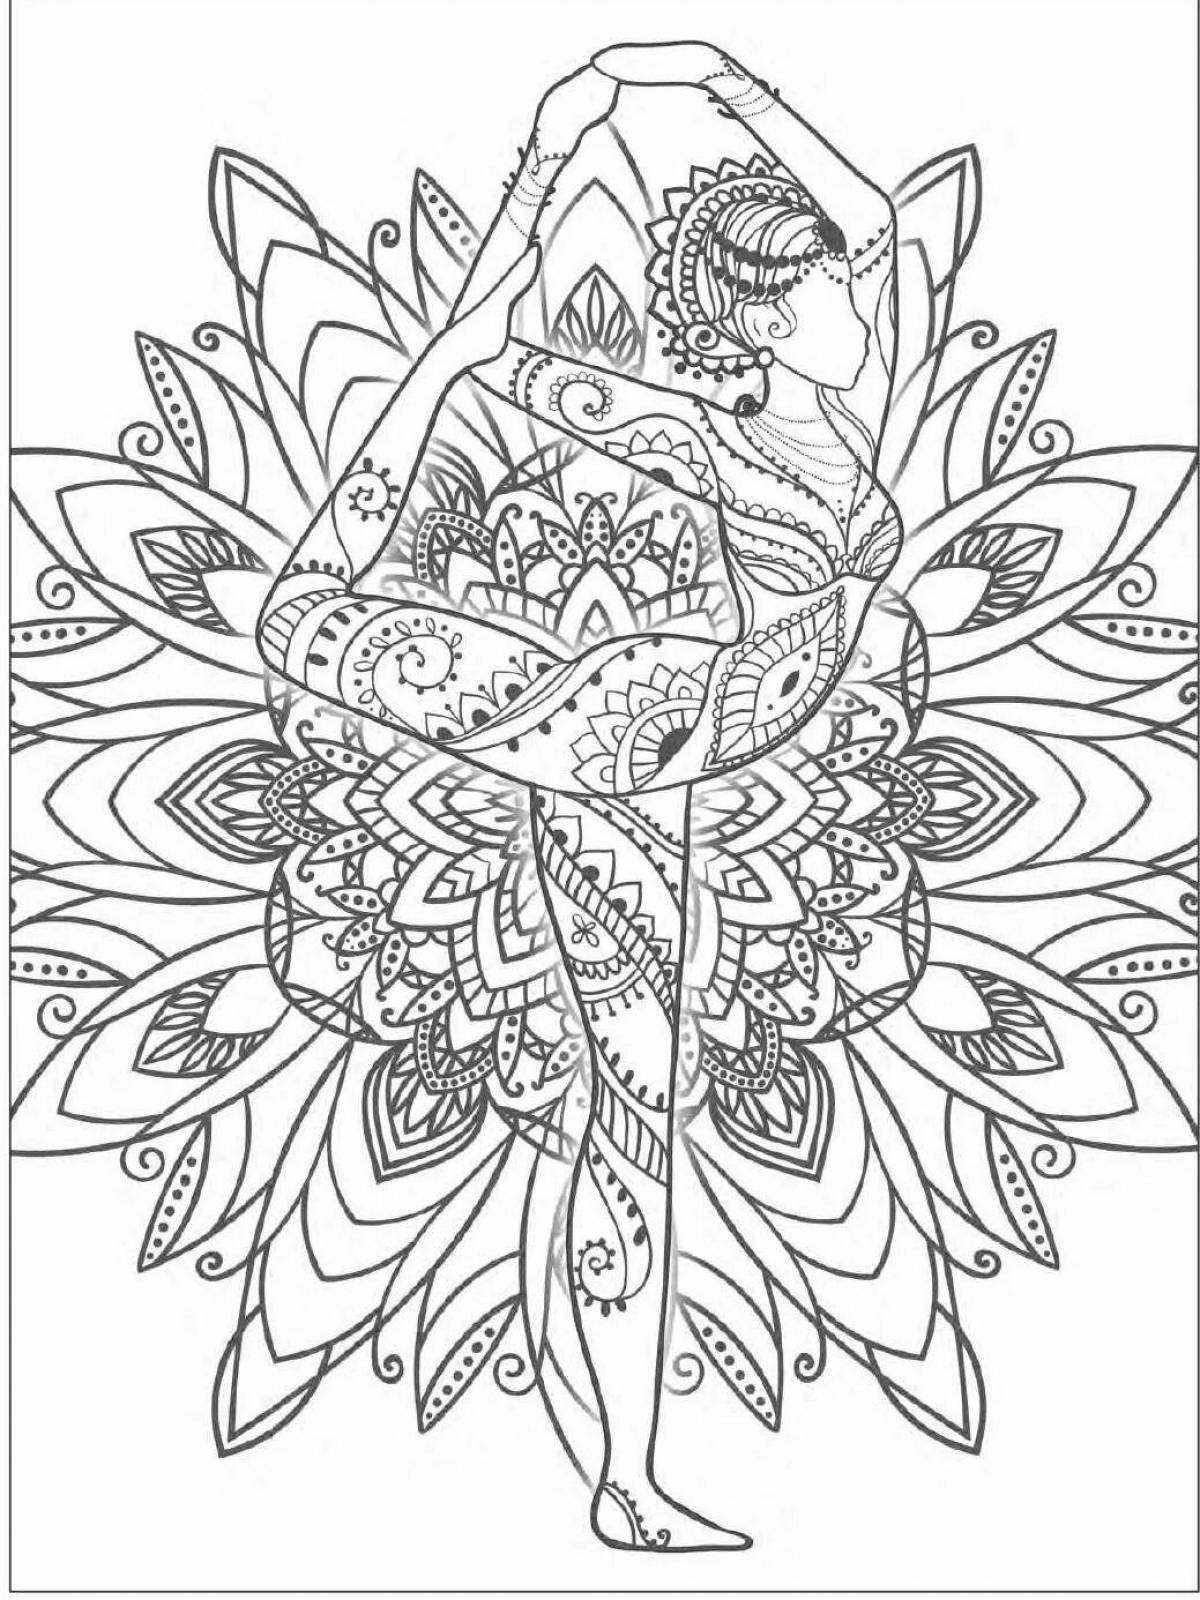 Charming art coloring book